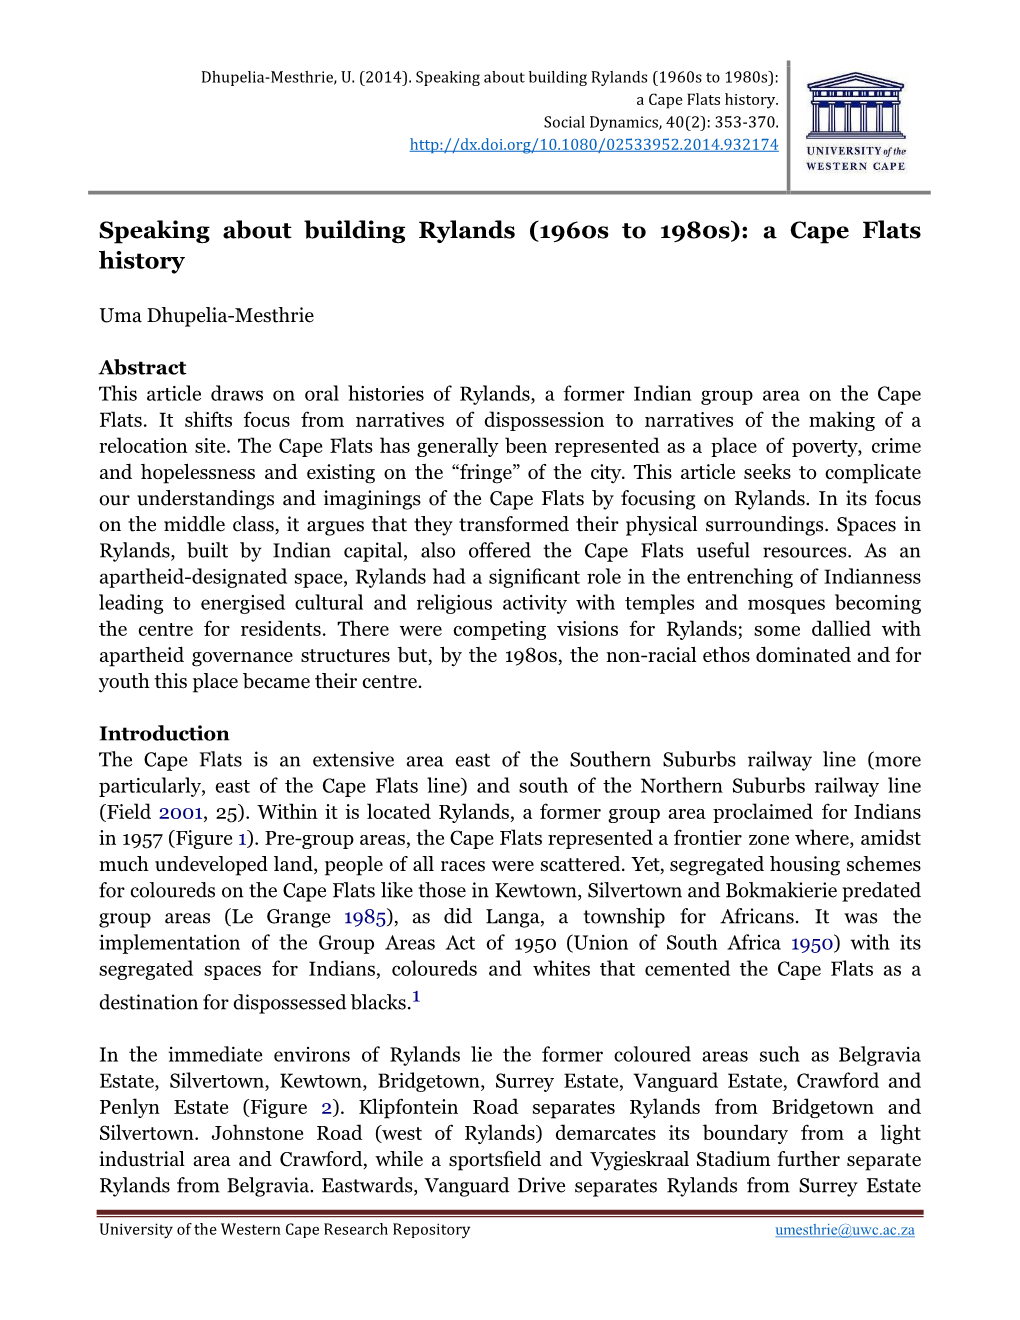 Speaking About Building Rylands (1960S to 1980S): a Cape Flats History